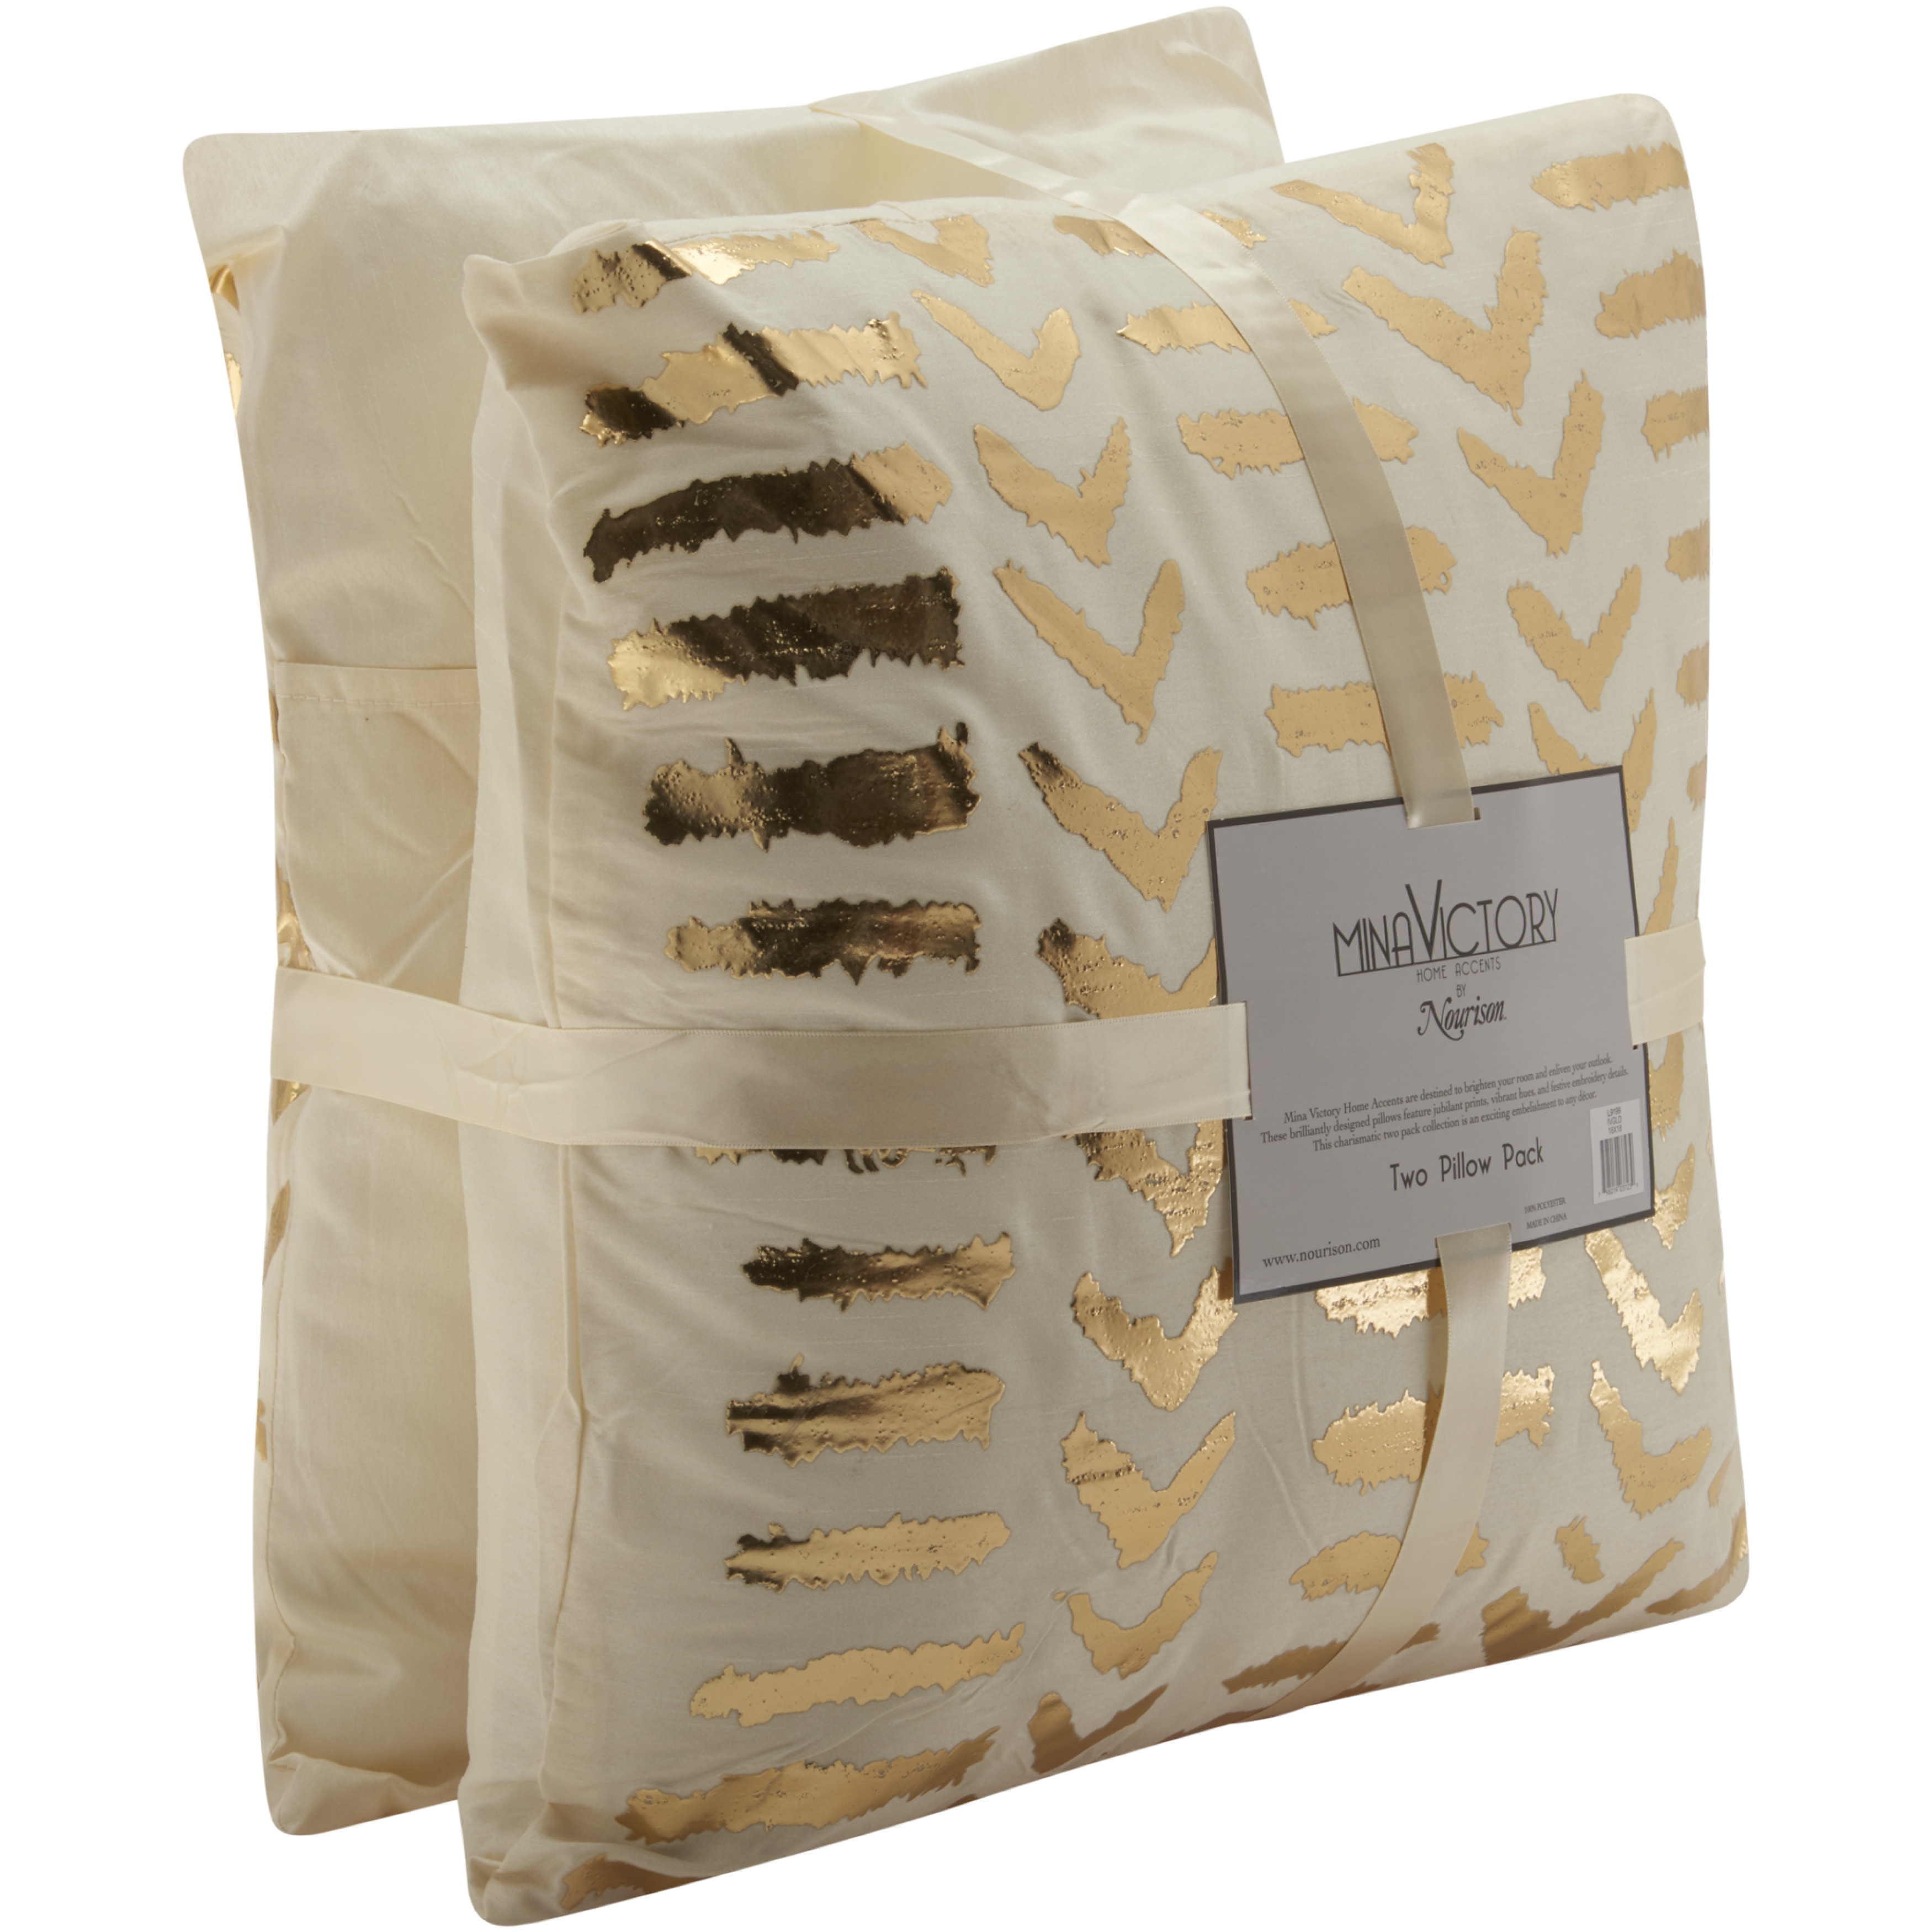 Decorative Feather Pillow Inserts, Set of 2 – Afternoon Light